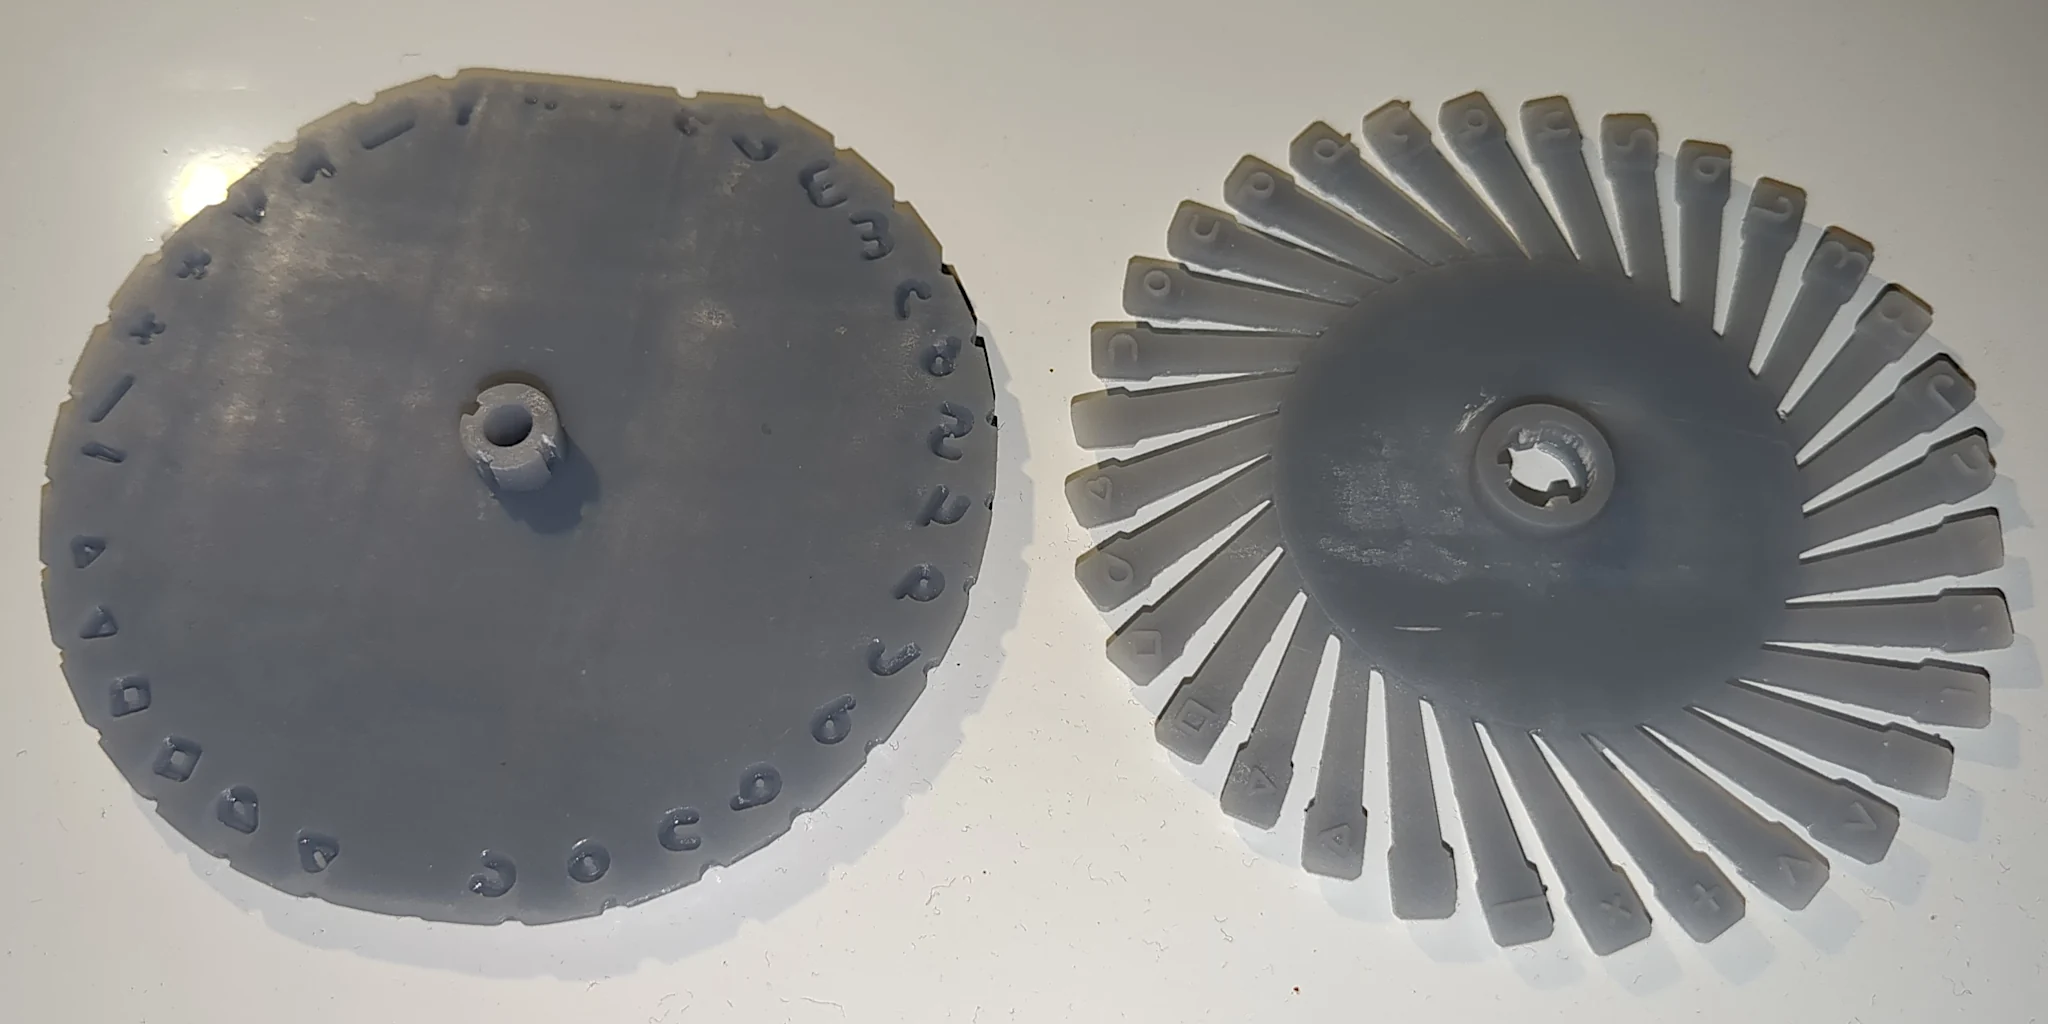 Domestic resin print of the new punch-wheel parts.